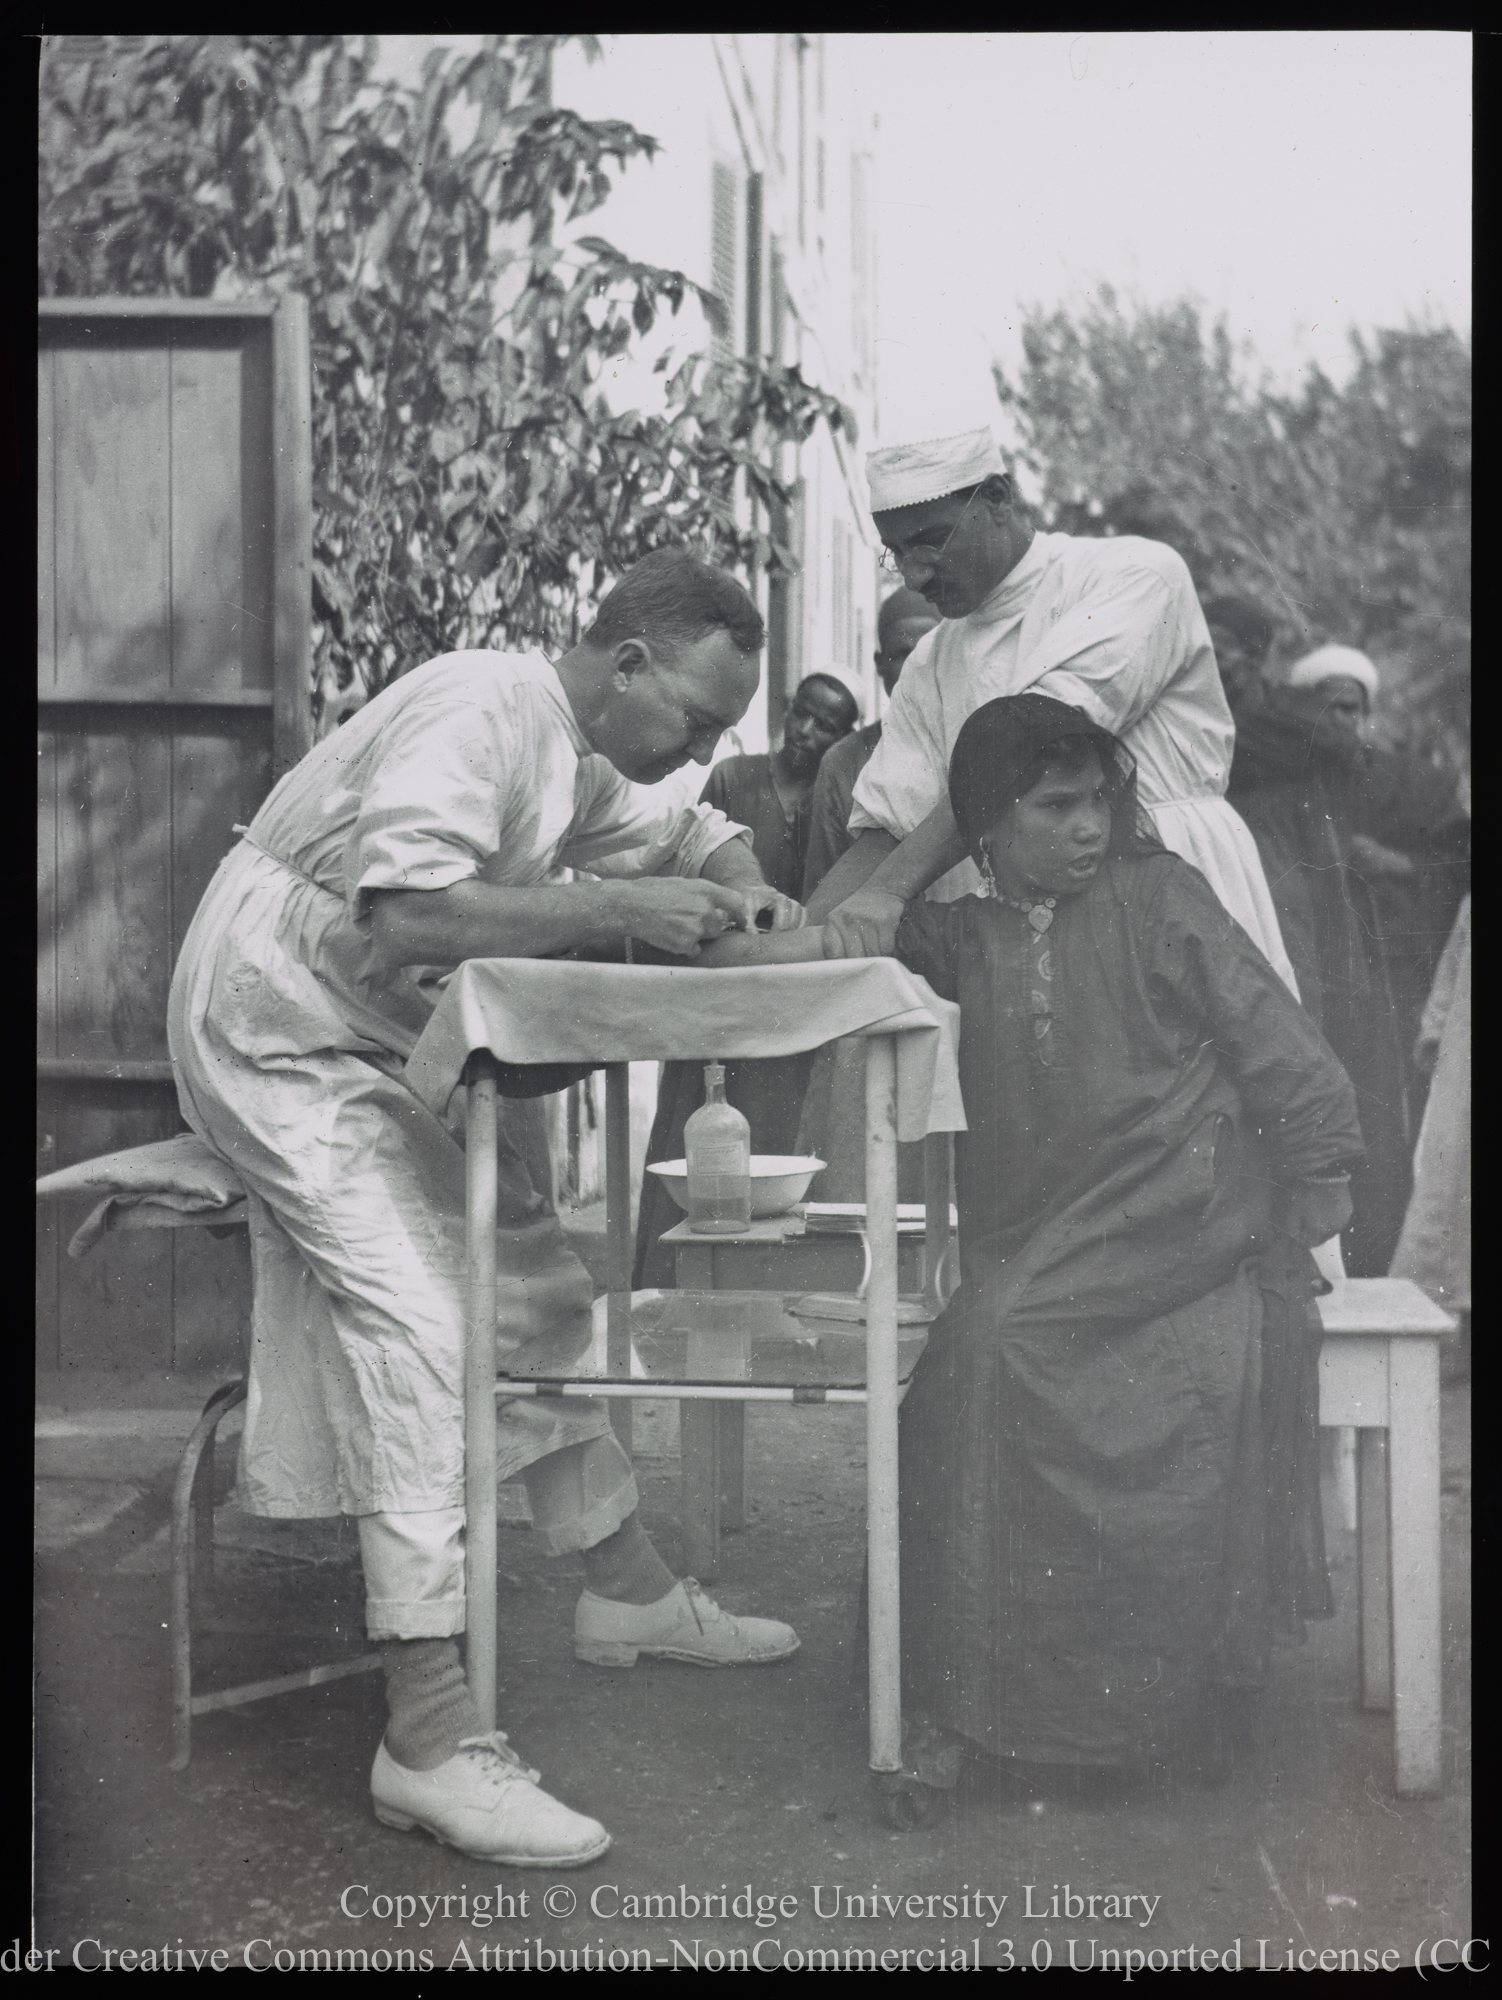 Dr. Bateman giving an intravenous injection, 1906 - 1938